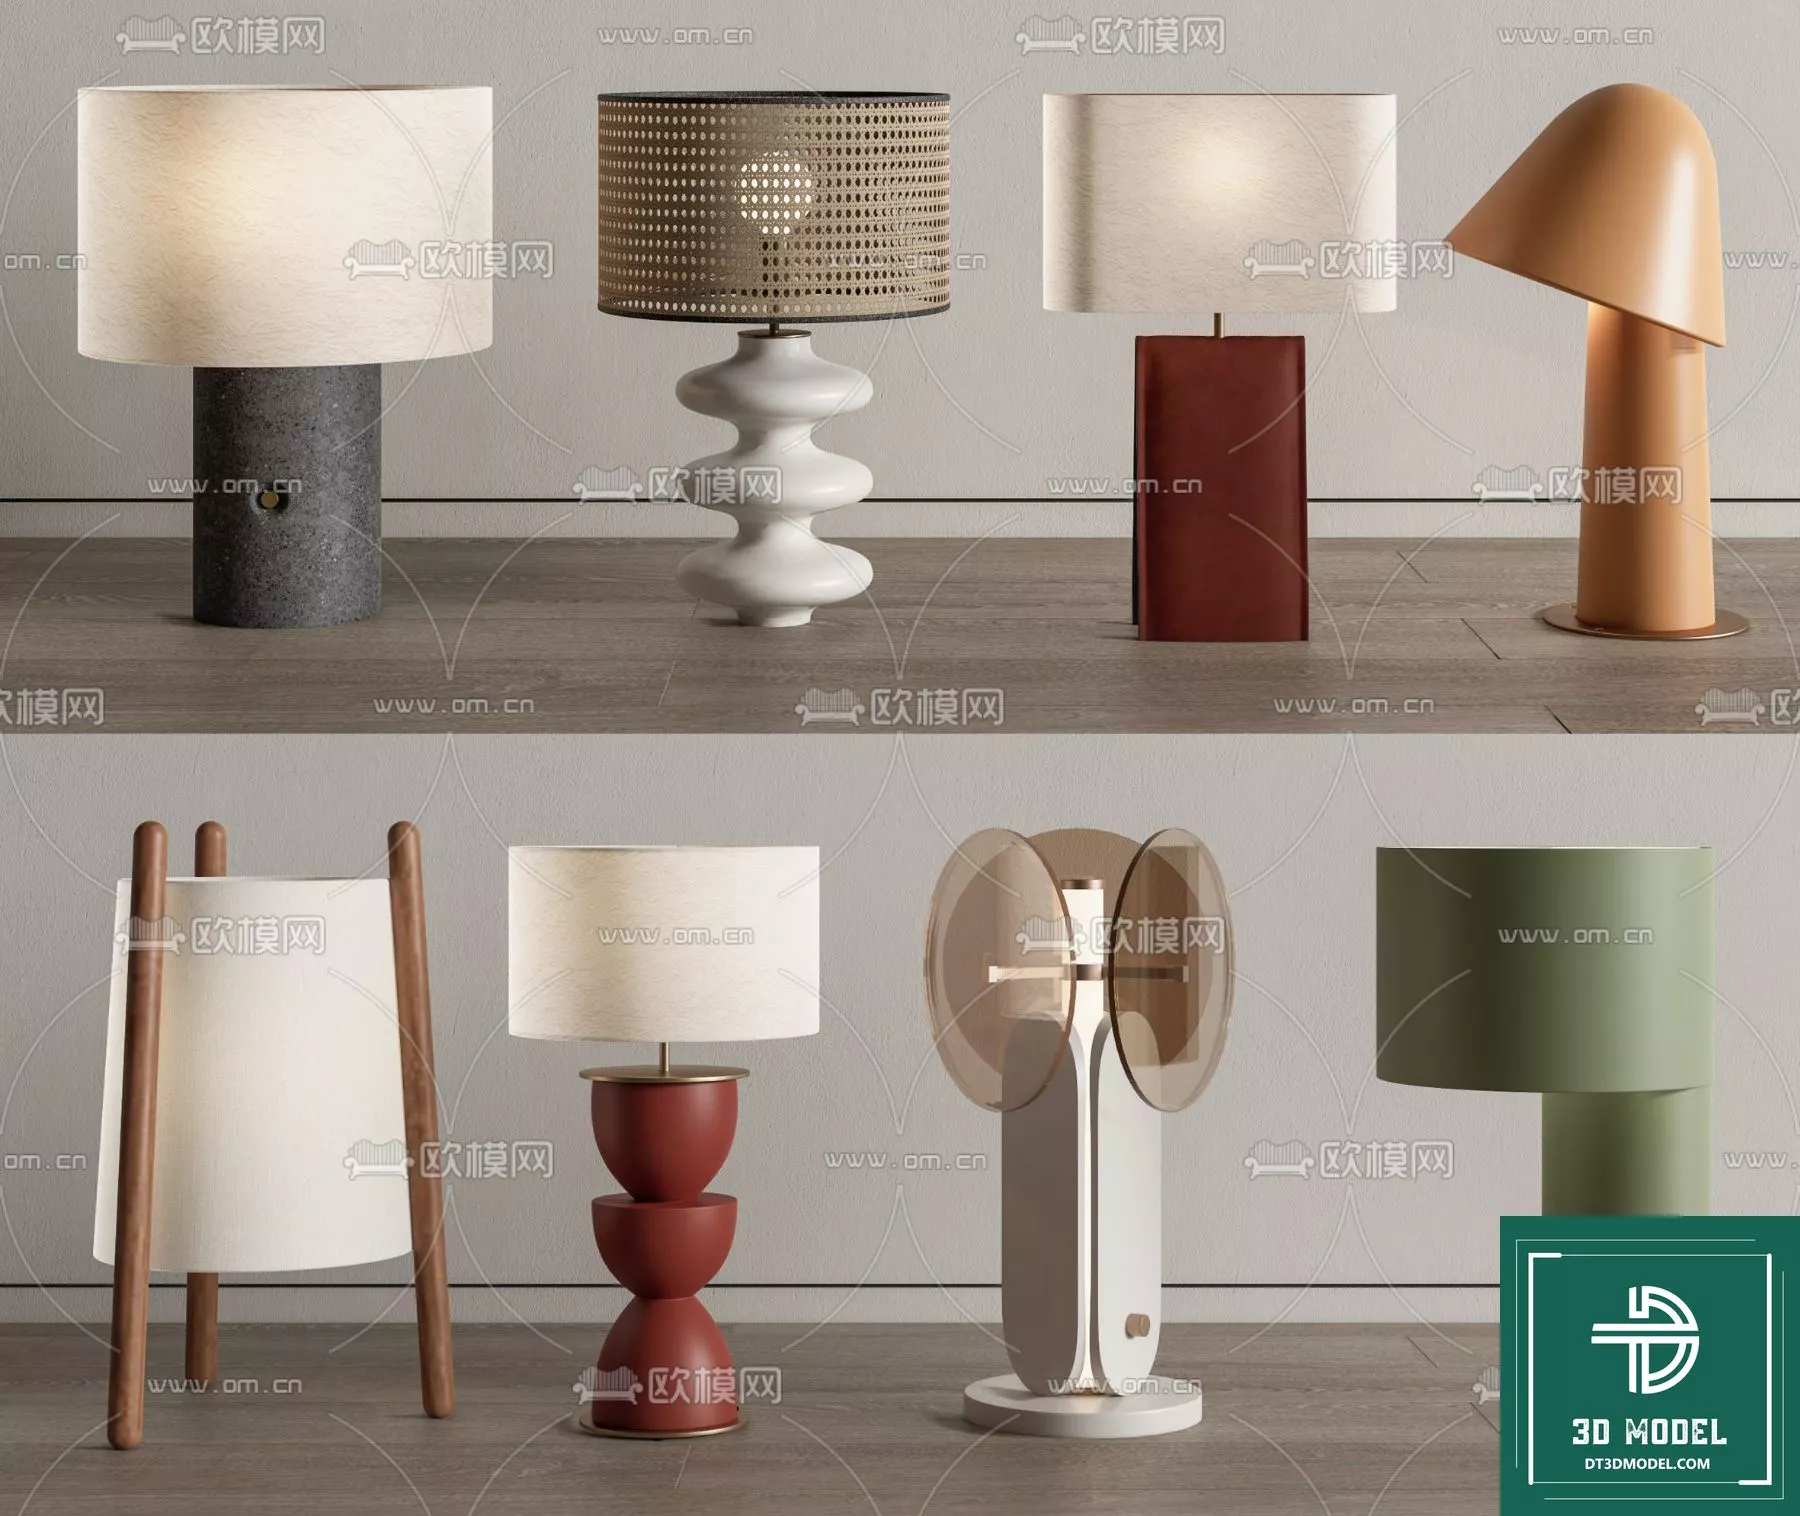 MODERN TABLE LAMP - SKETCHUP 3D MODEL - VRAY OR ENSCAPE - ID14635